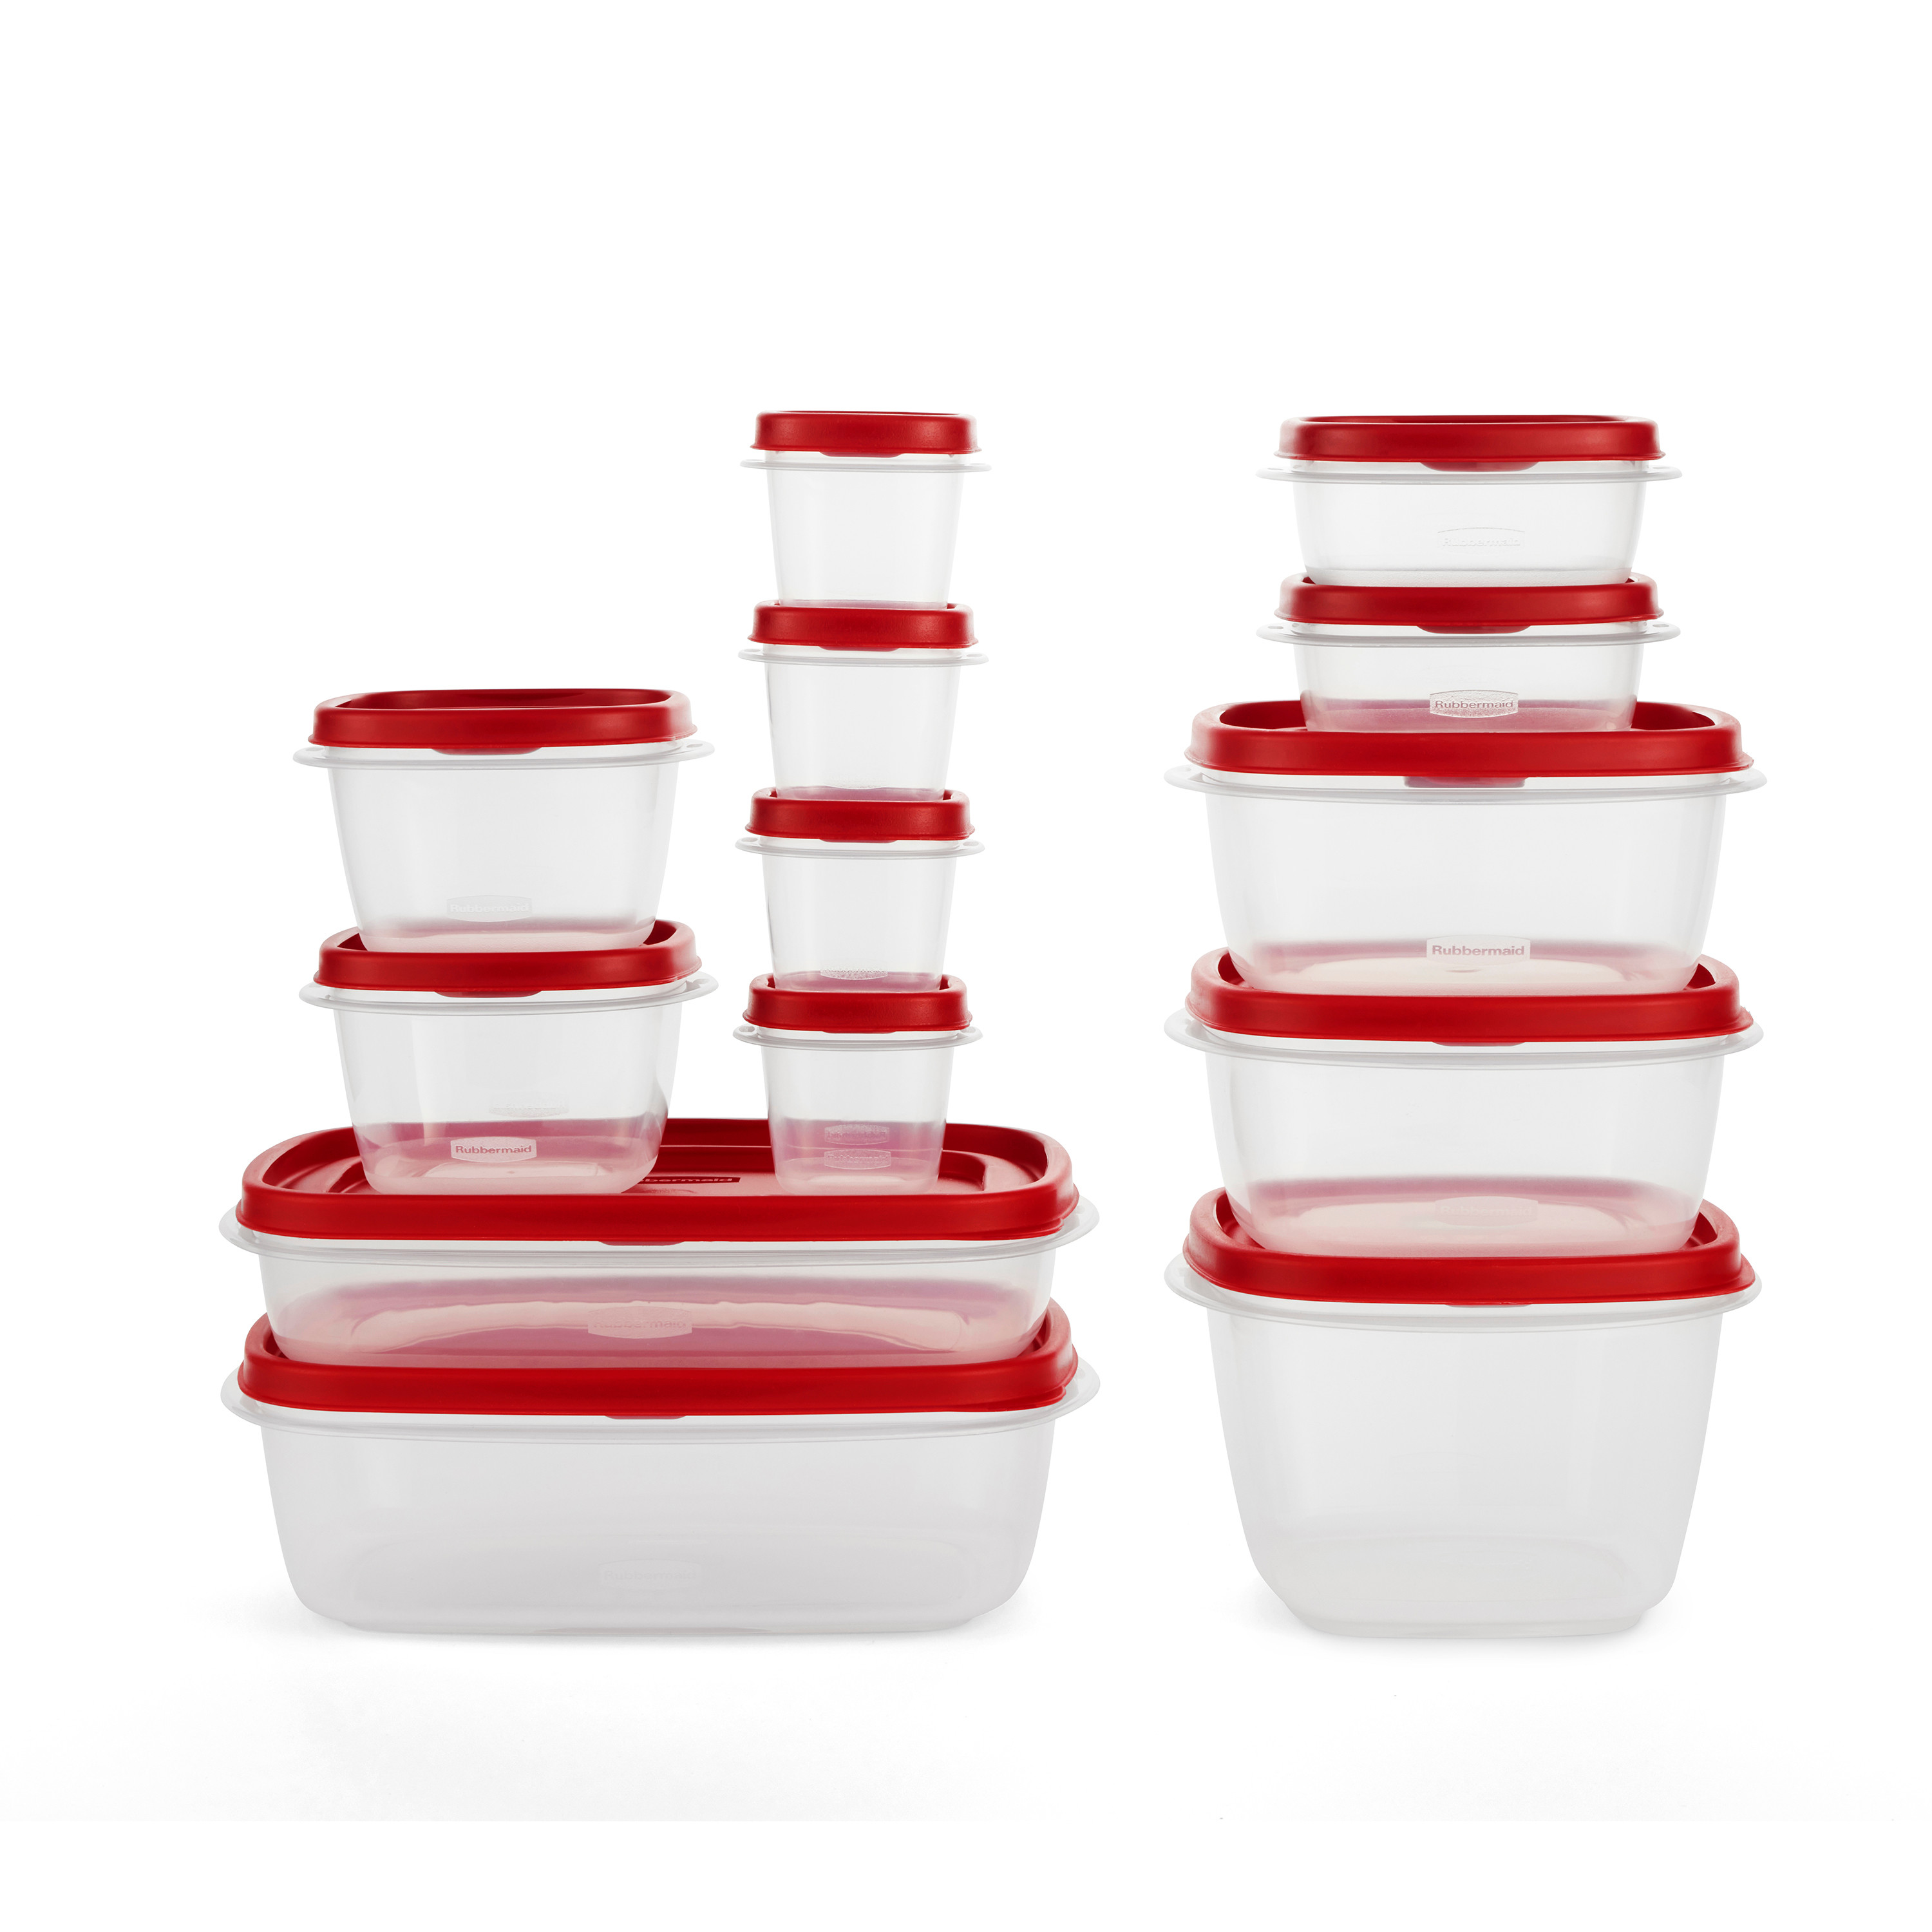 Rubbermaid EasyFindLids 26 Piece Plastic Food Storage Container Set with Vents, (39.5 Cup), Racer Red - image 1 of 9